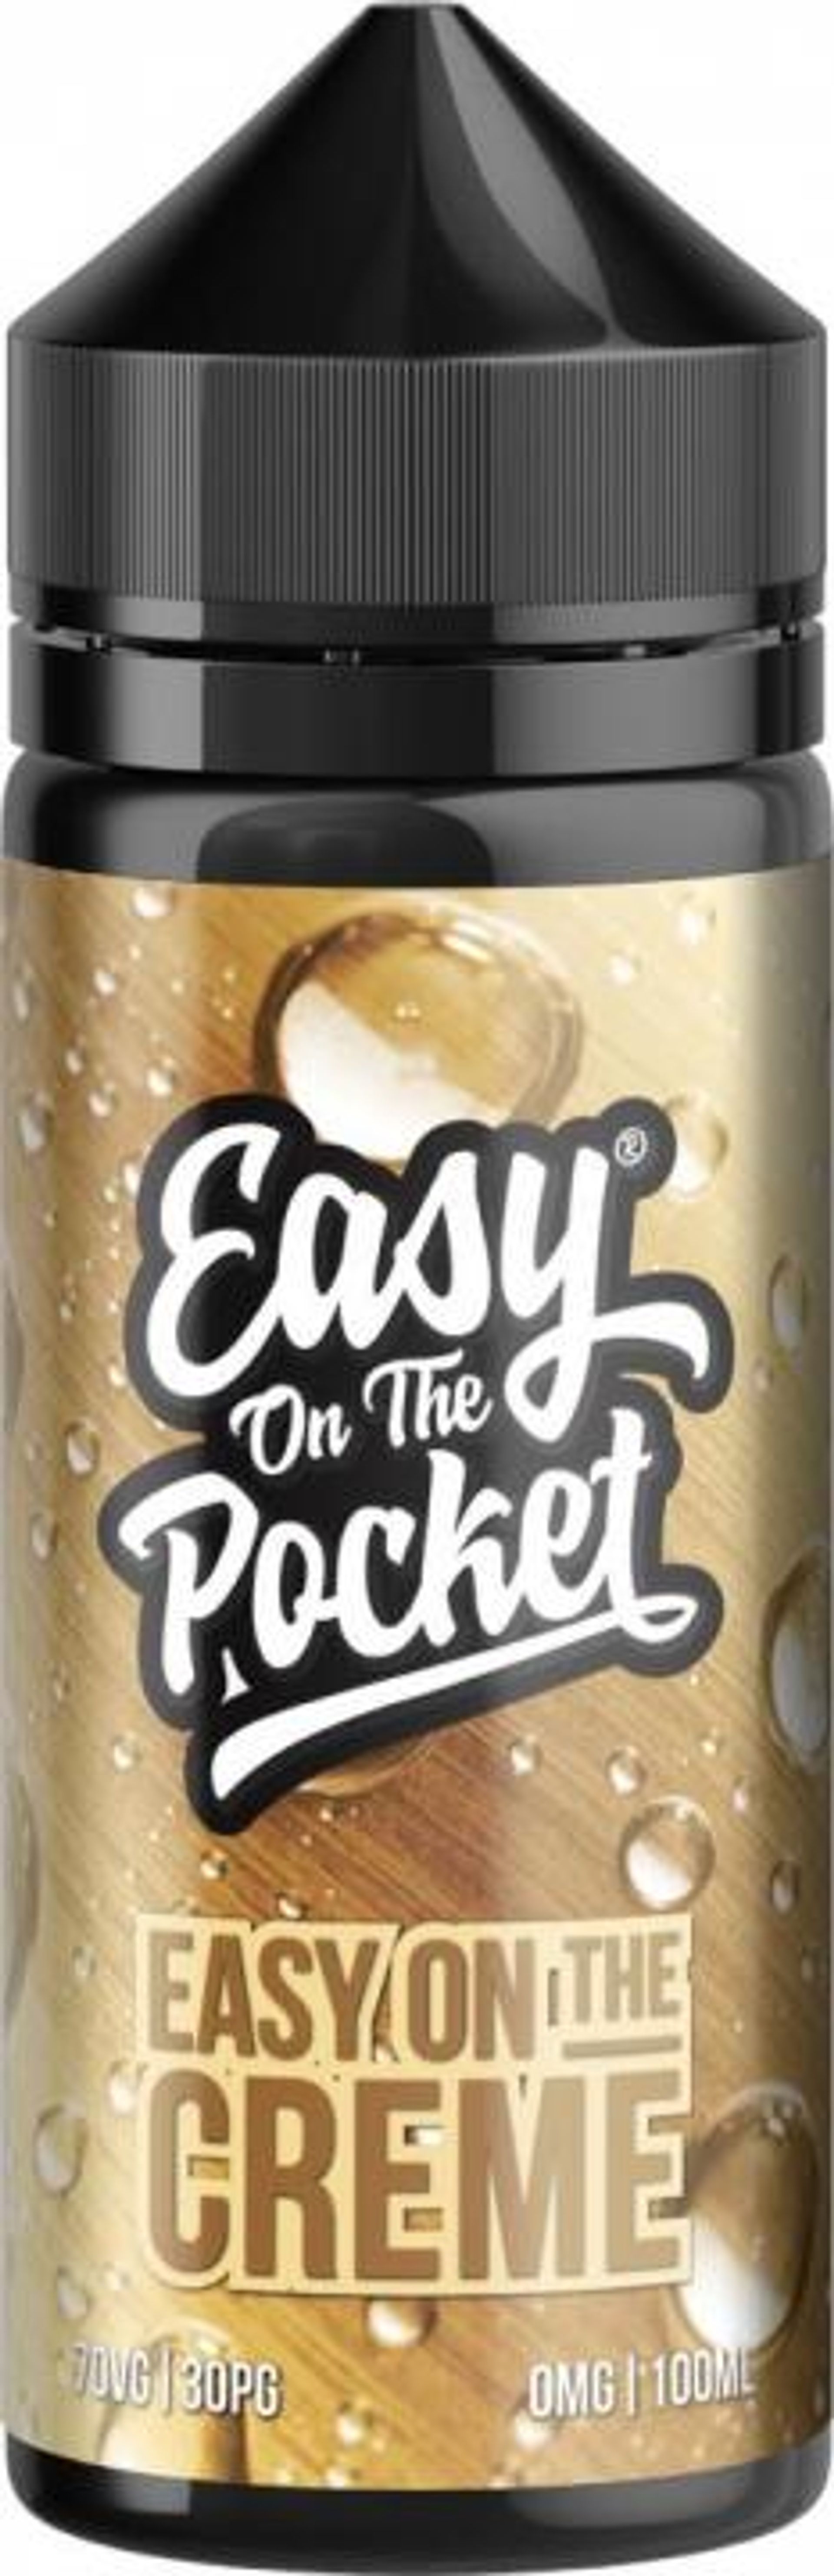 Image of Easy On The Creme by Easy On The Pocket